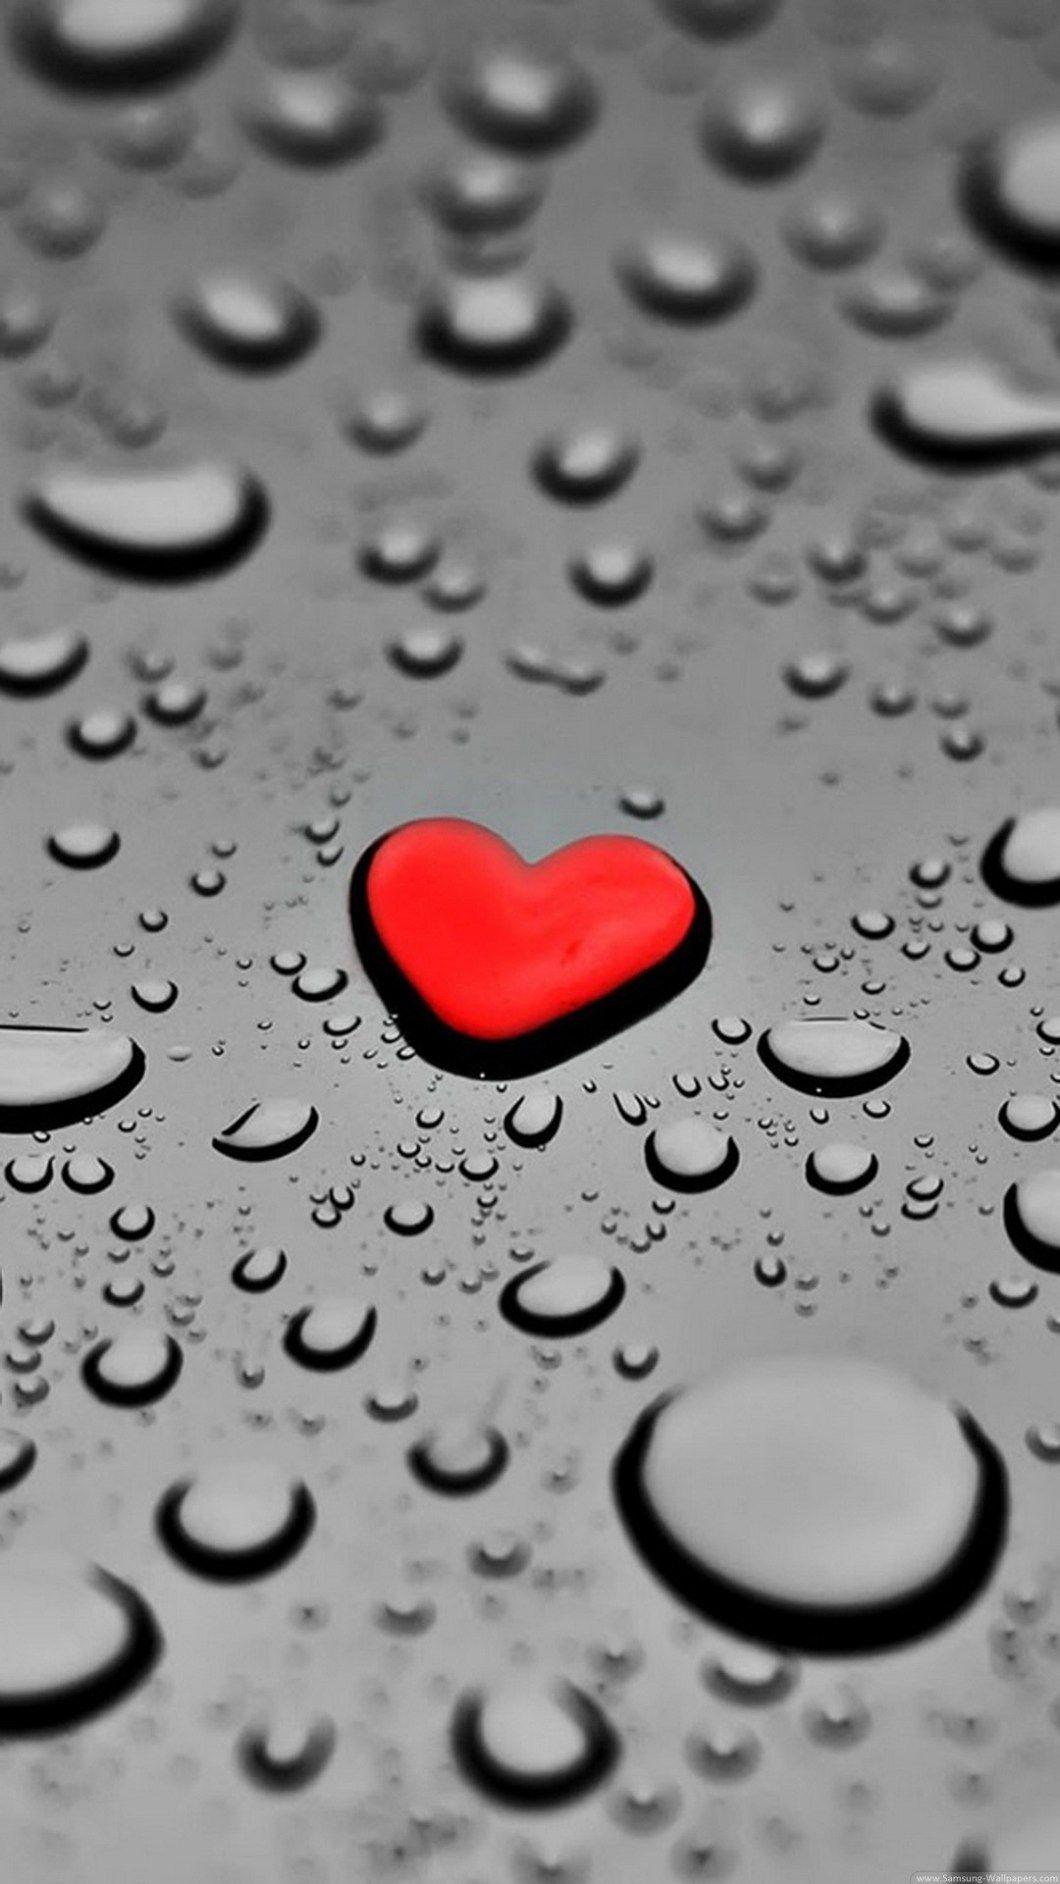 Beautiful Love Wallpapers For Mobile Phone Hd